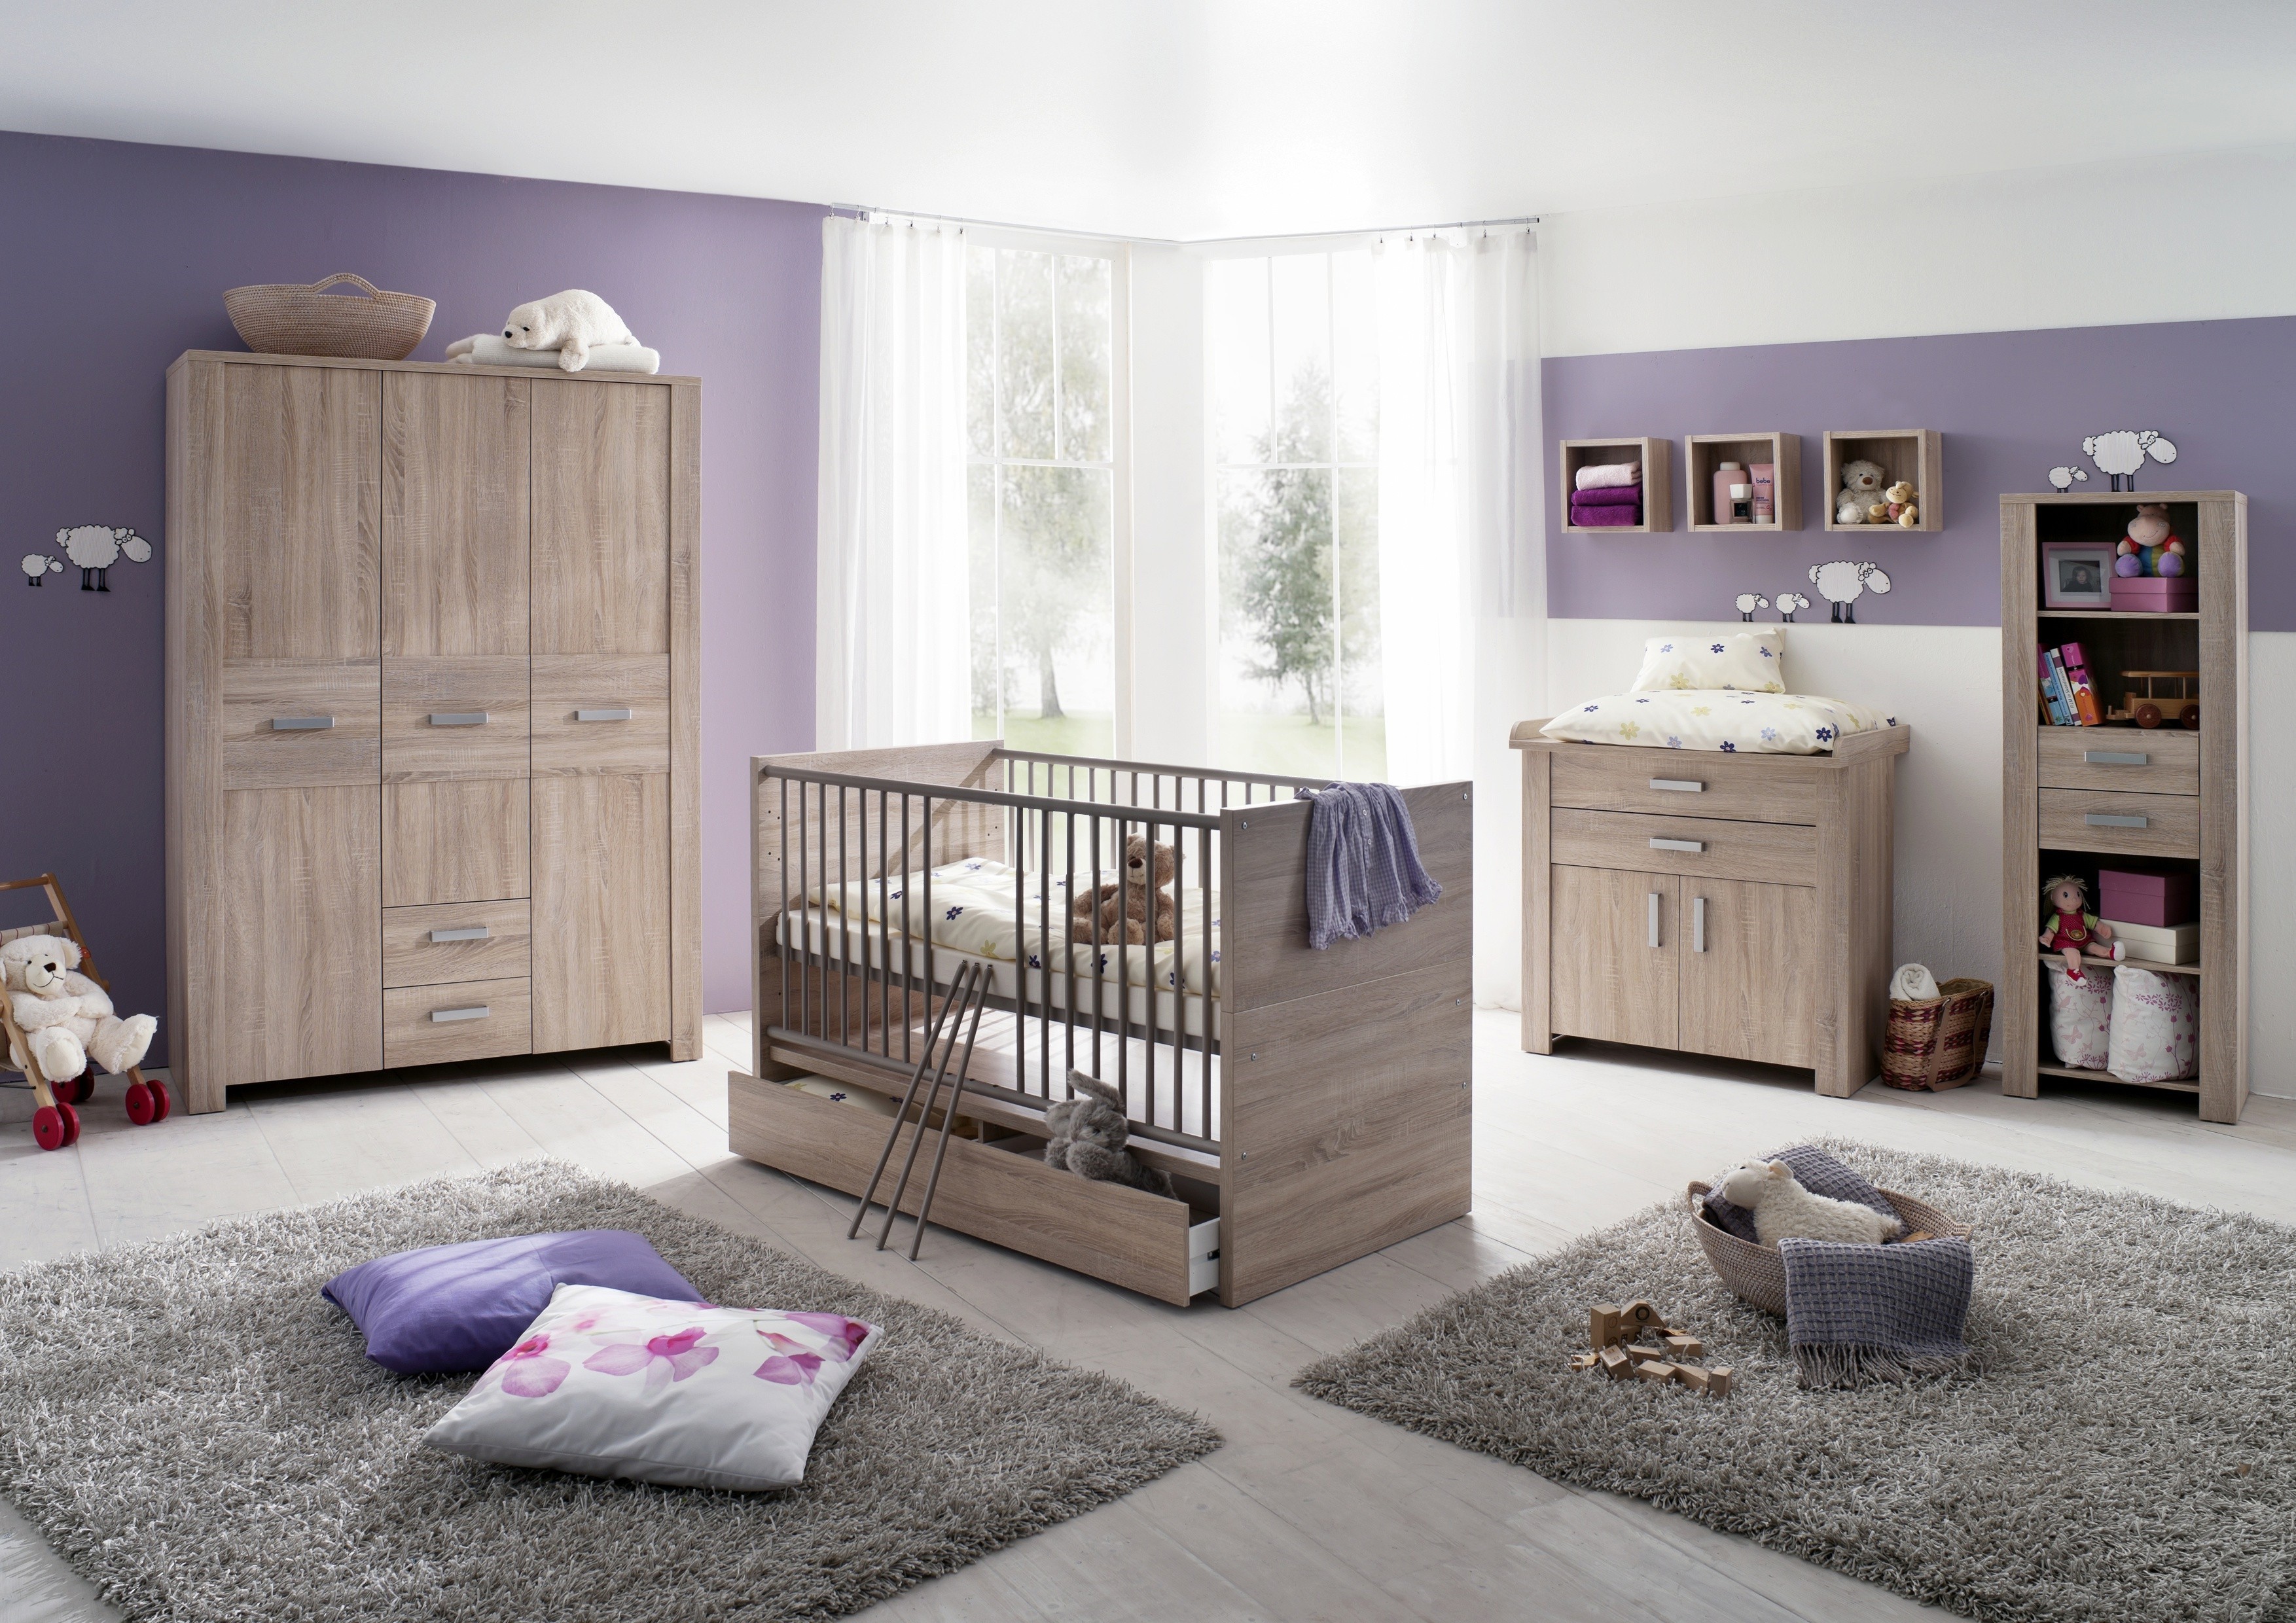 Uncover 84+ Charming baby bedroom furniture nz Trend Of The Year